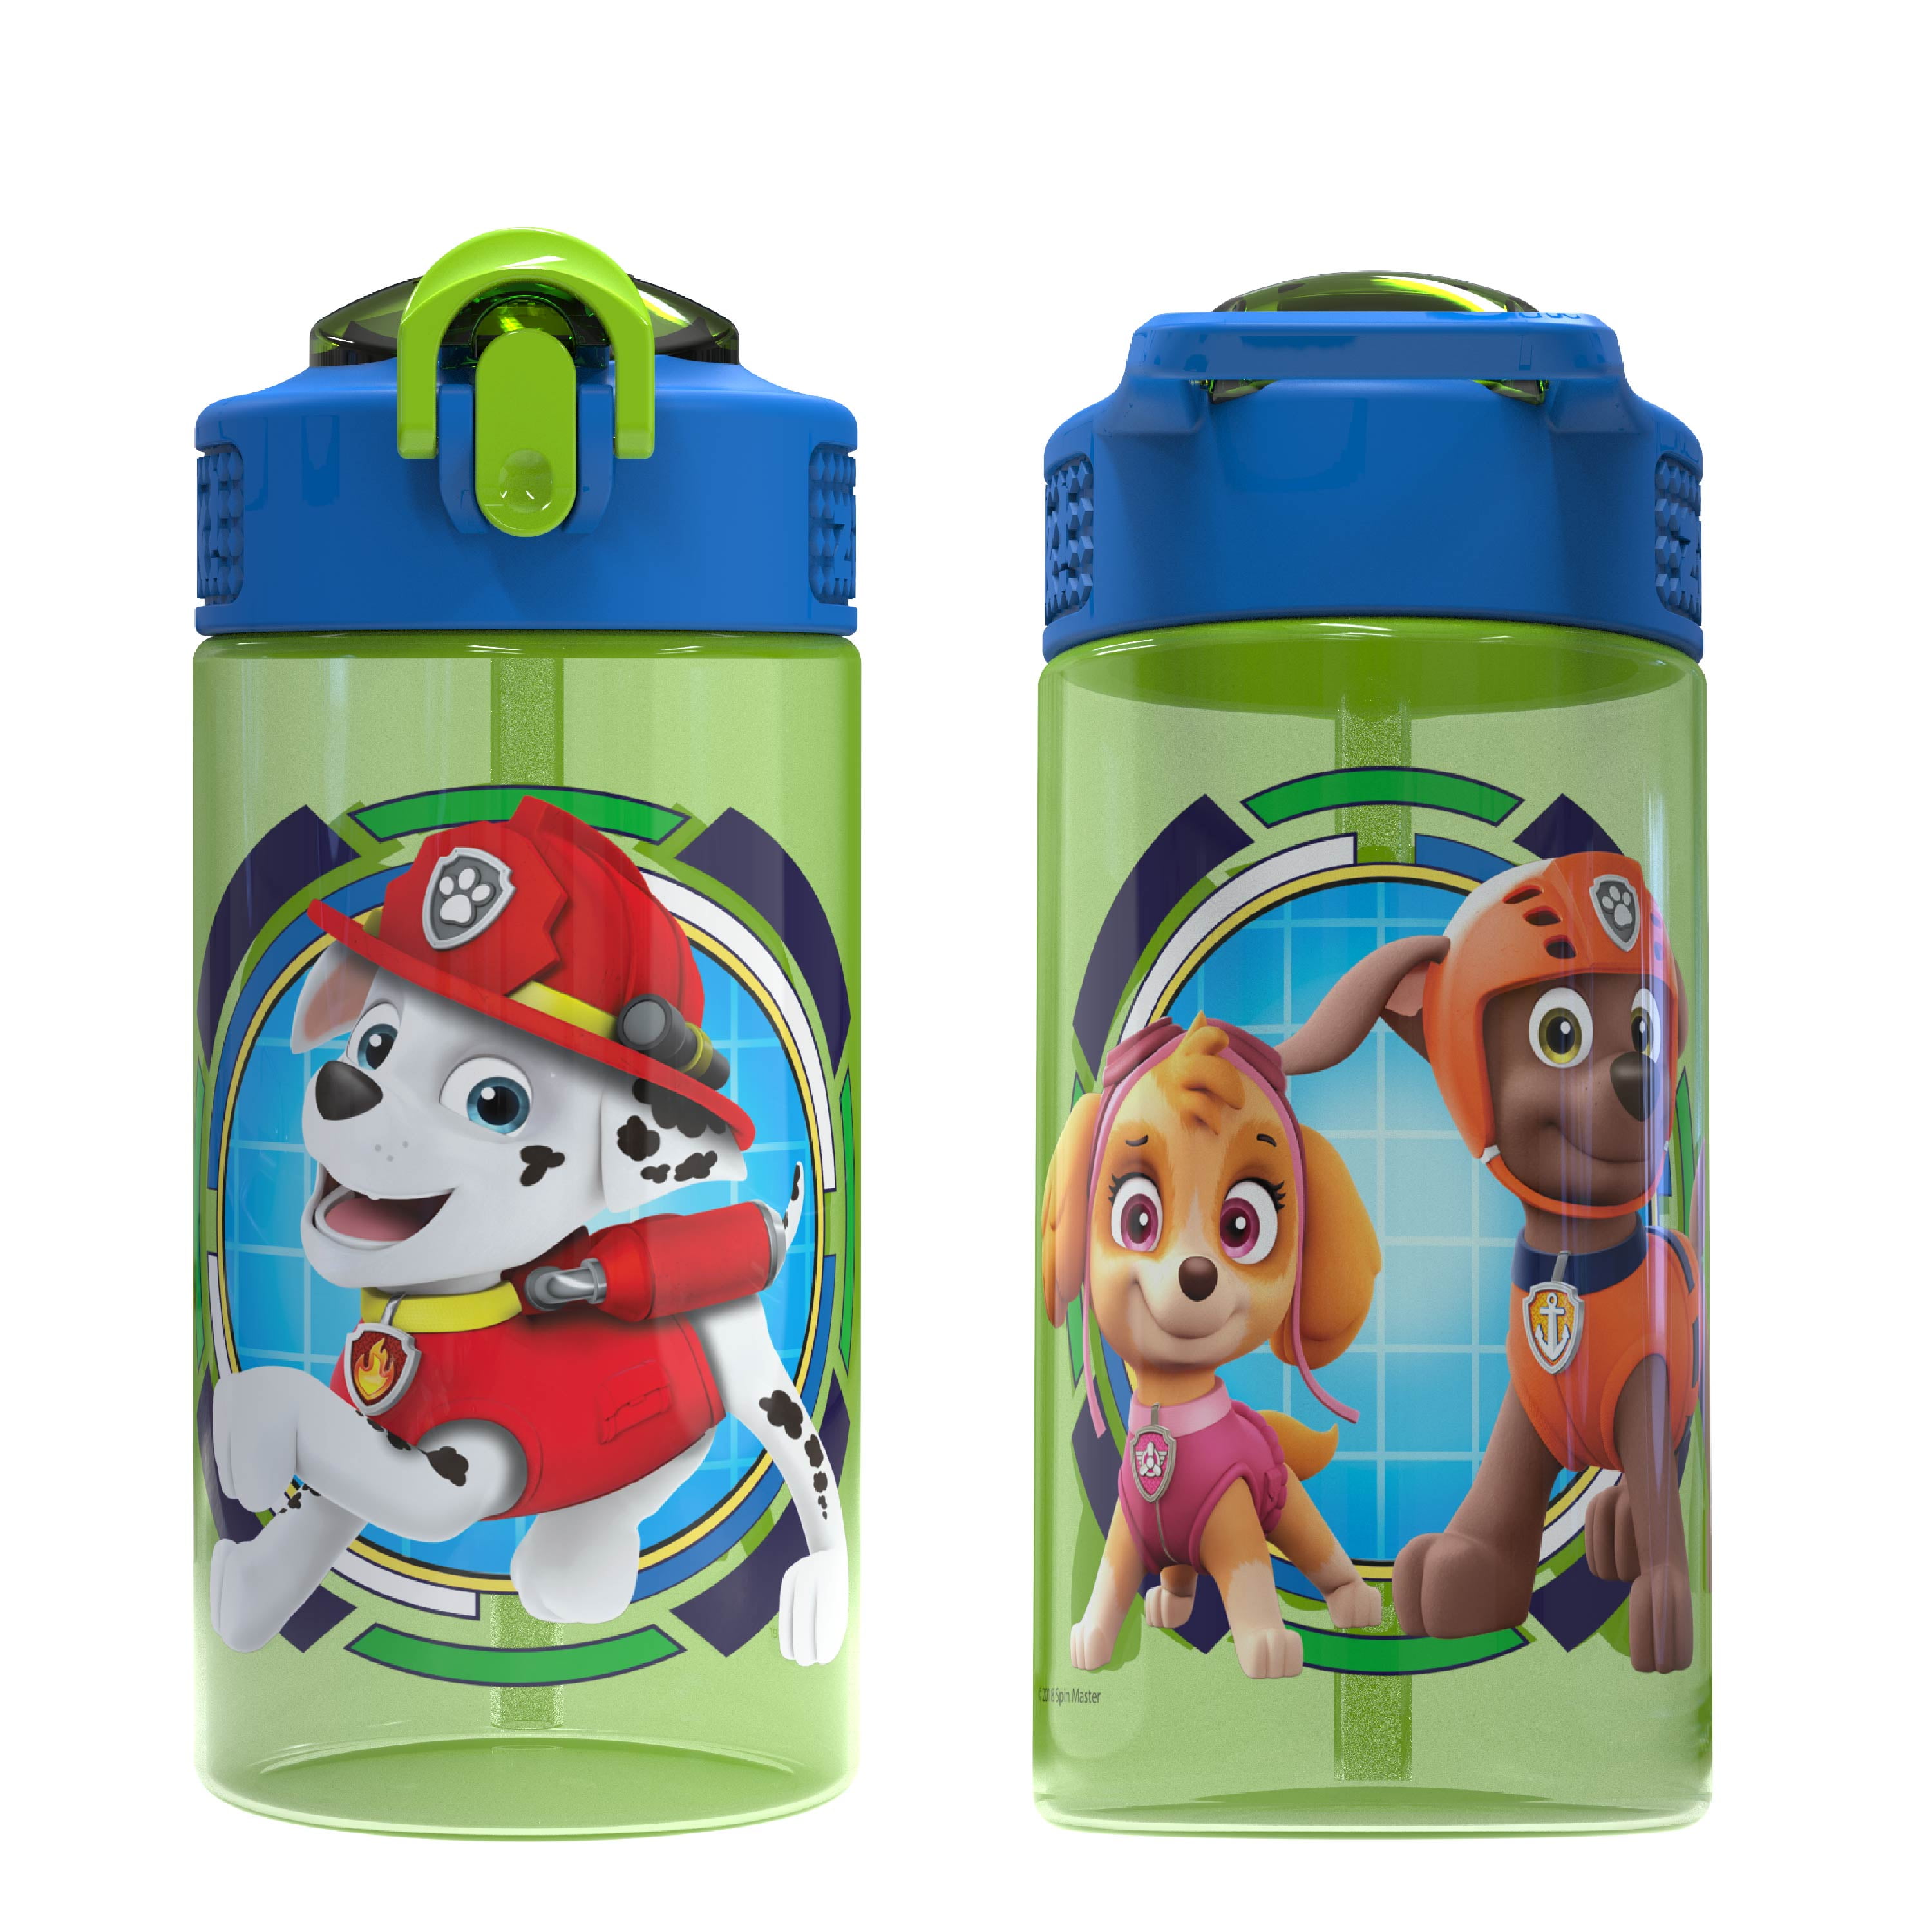 Thermos Kids Plastic Water Bottle with Spout, Paw Patrol, 16 Fluid